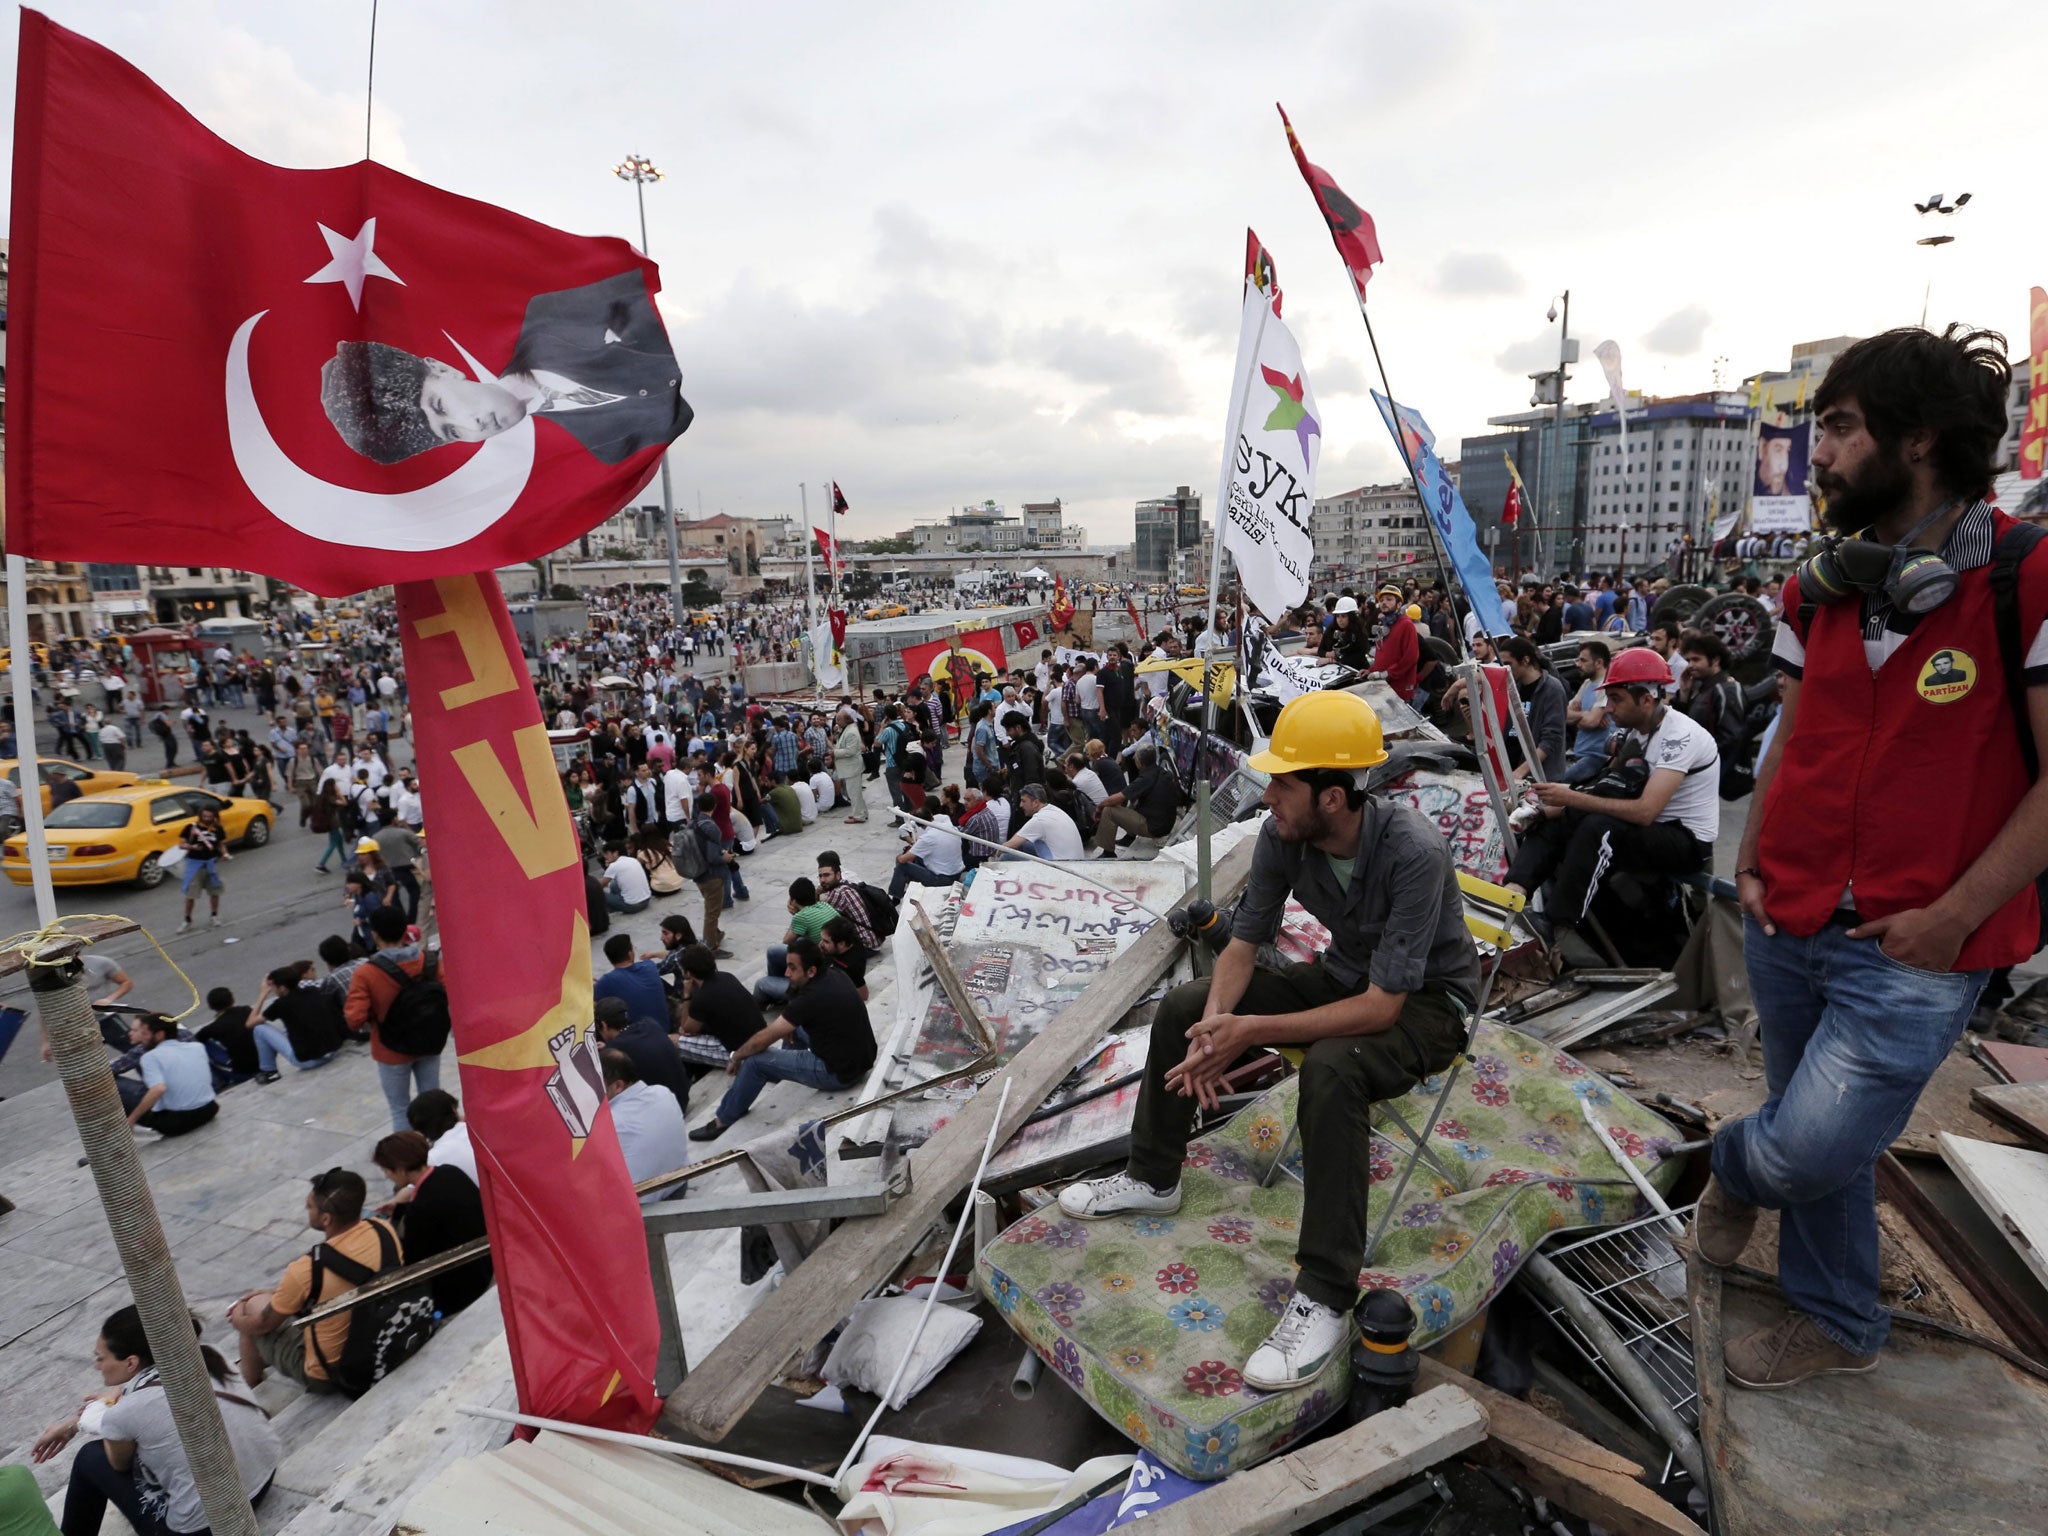 Anti-goverment protesters unfurl the Turkish national flag in Taksim